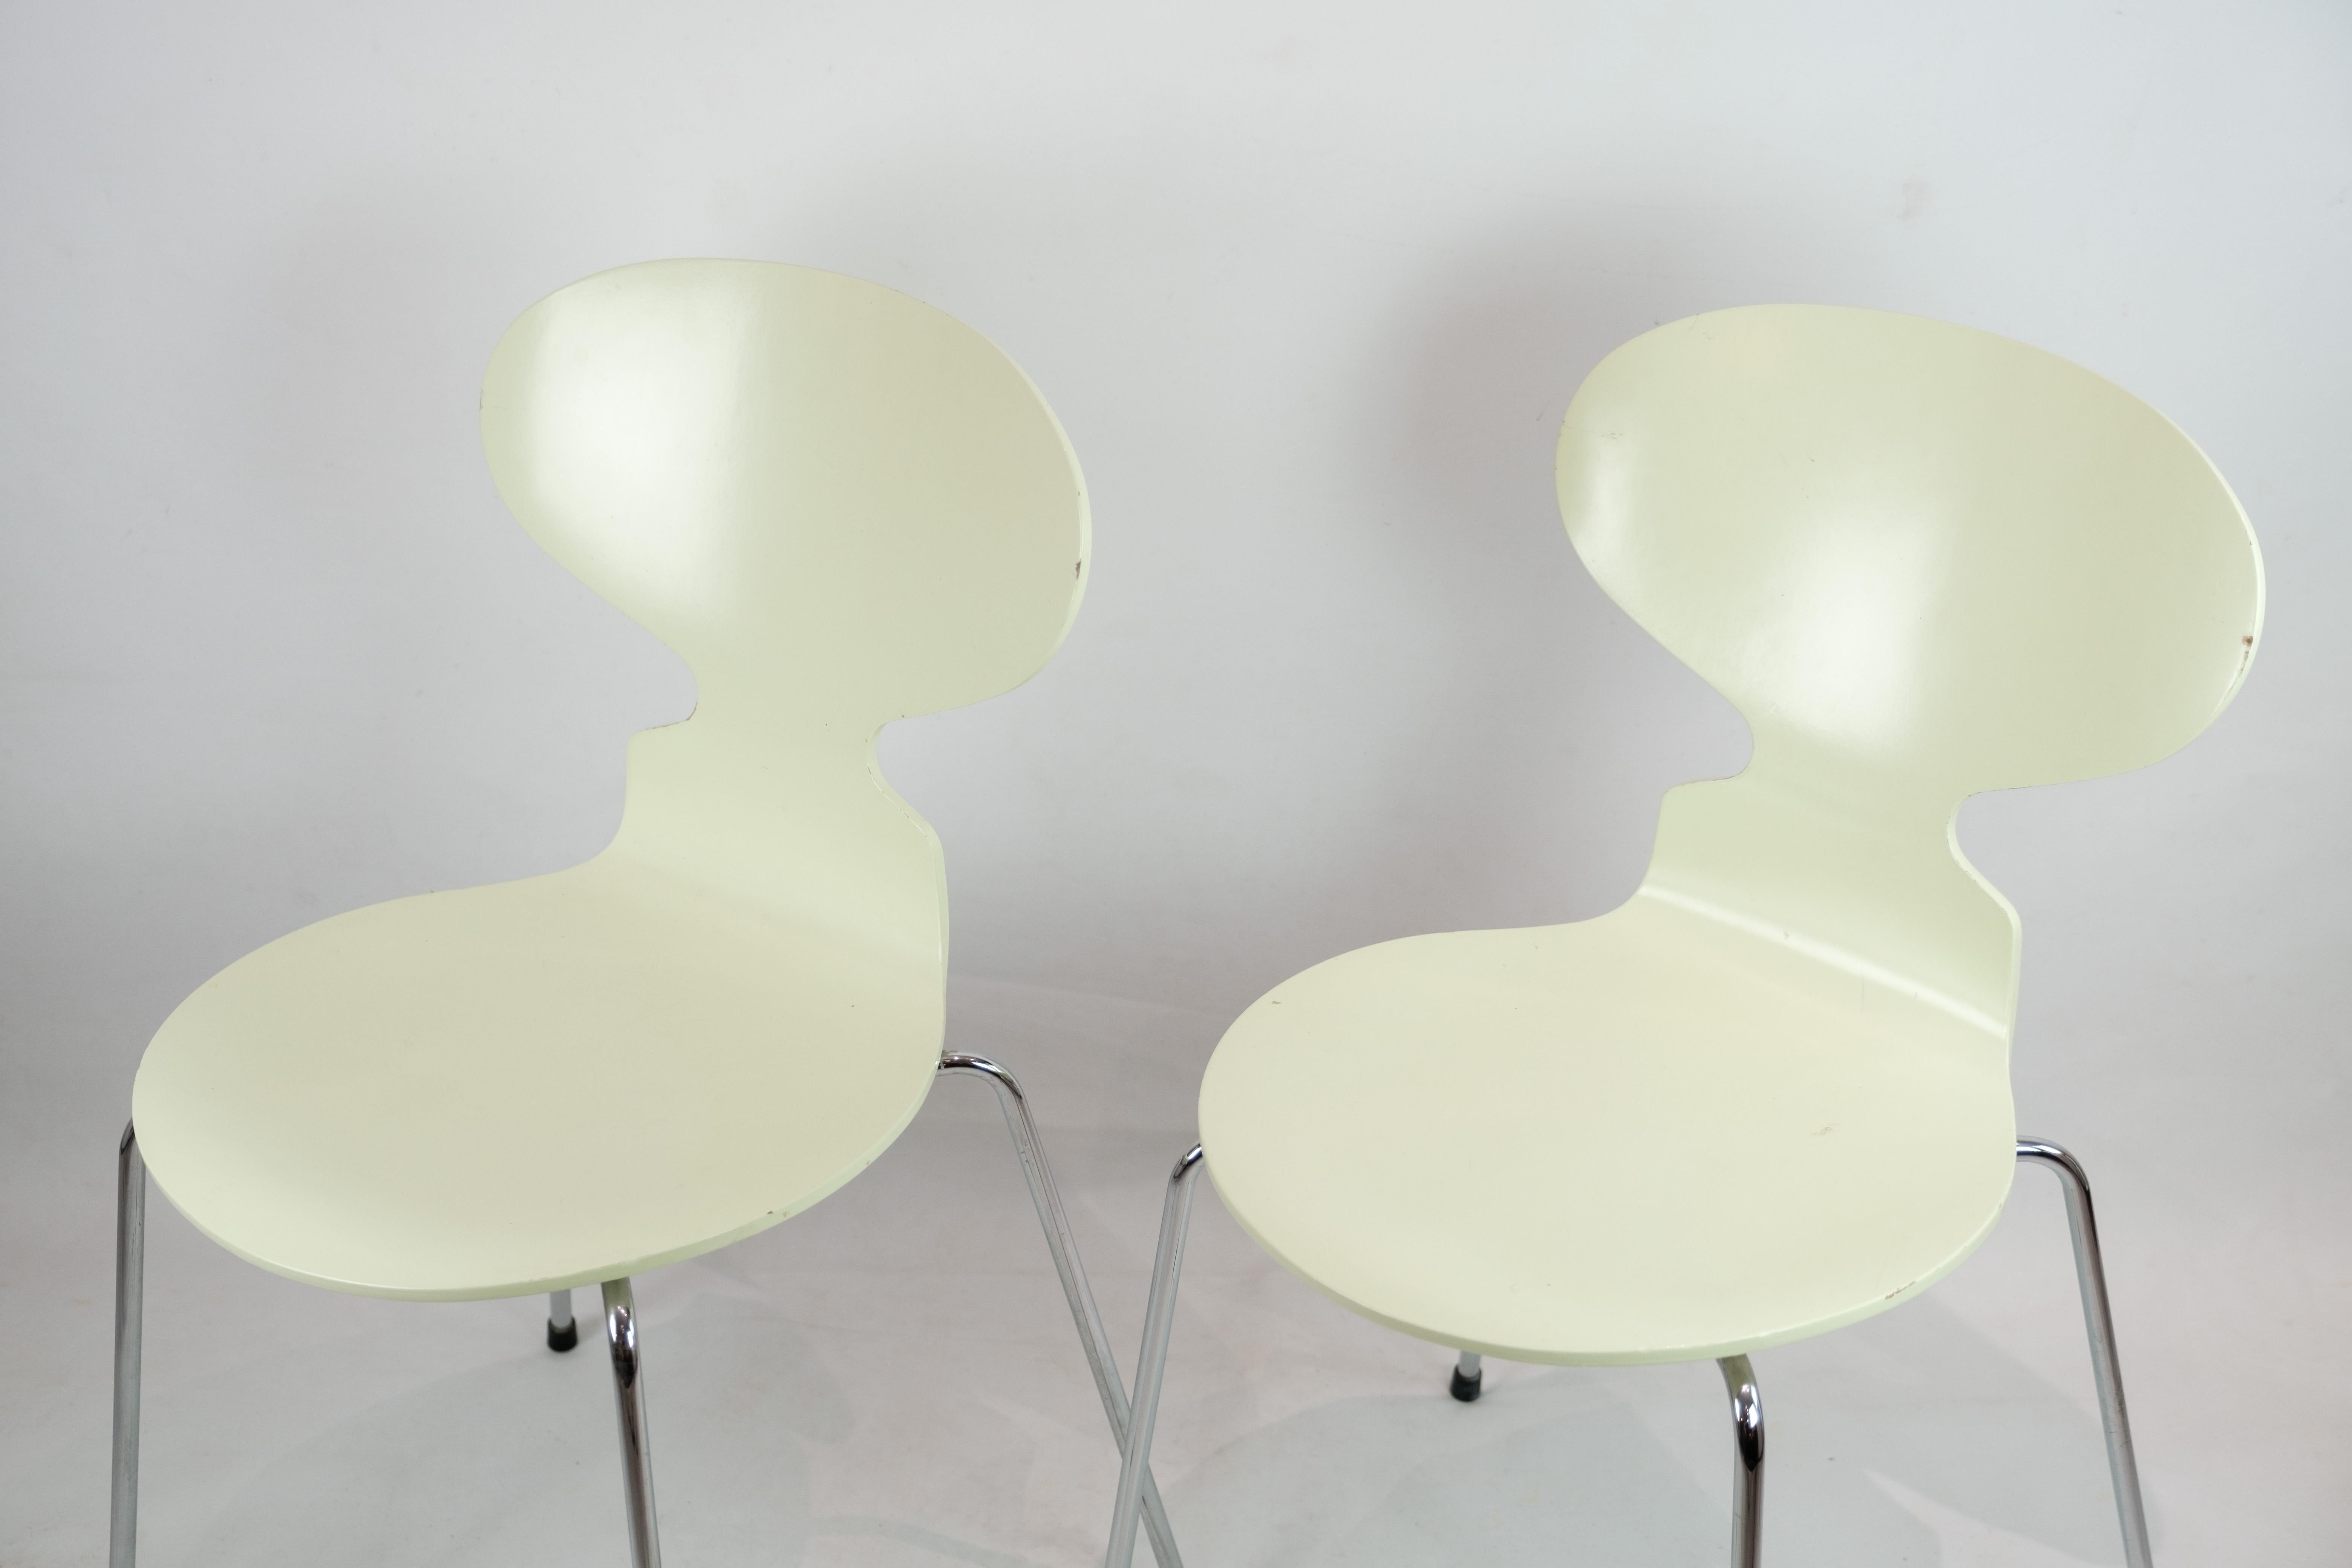 Mid-Century Modern Original Ant Chairs Model 3101 In Pastel Green By Arne Jacobsen From 1970s For Sale